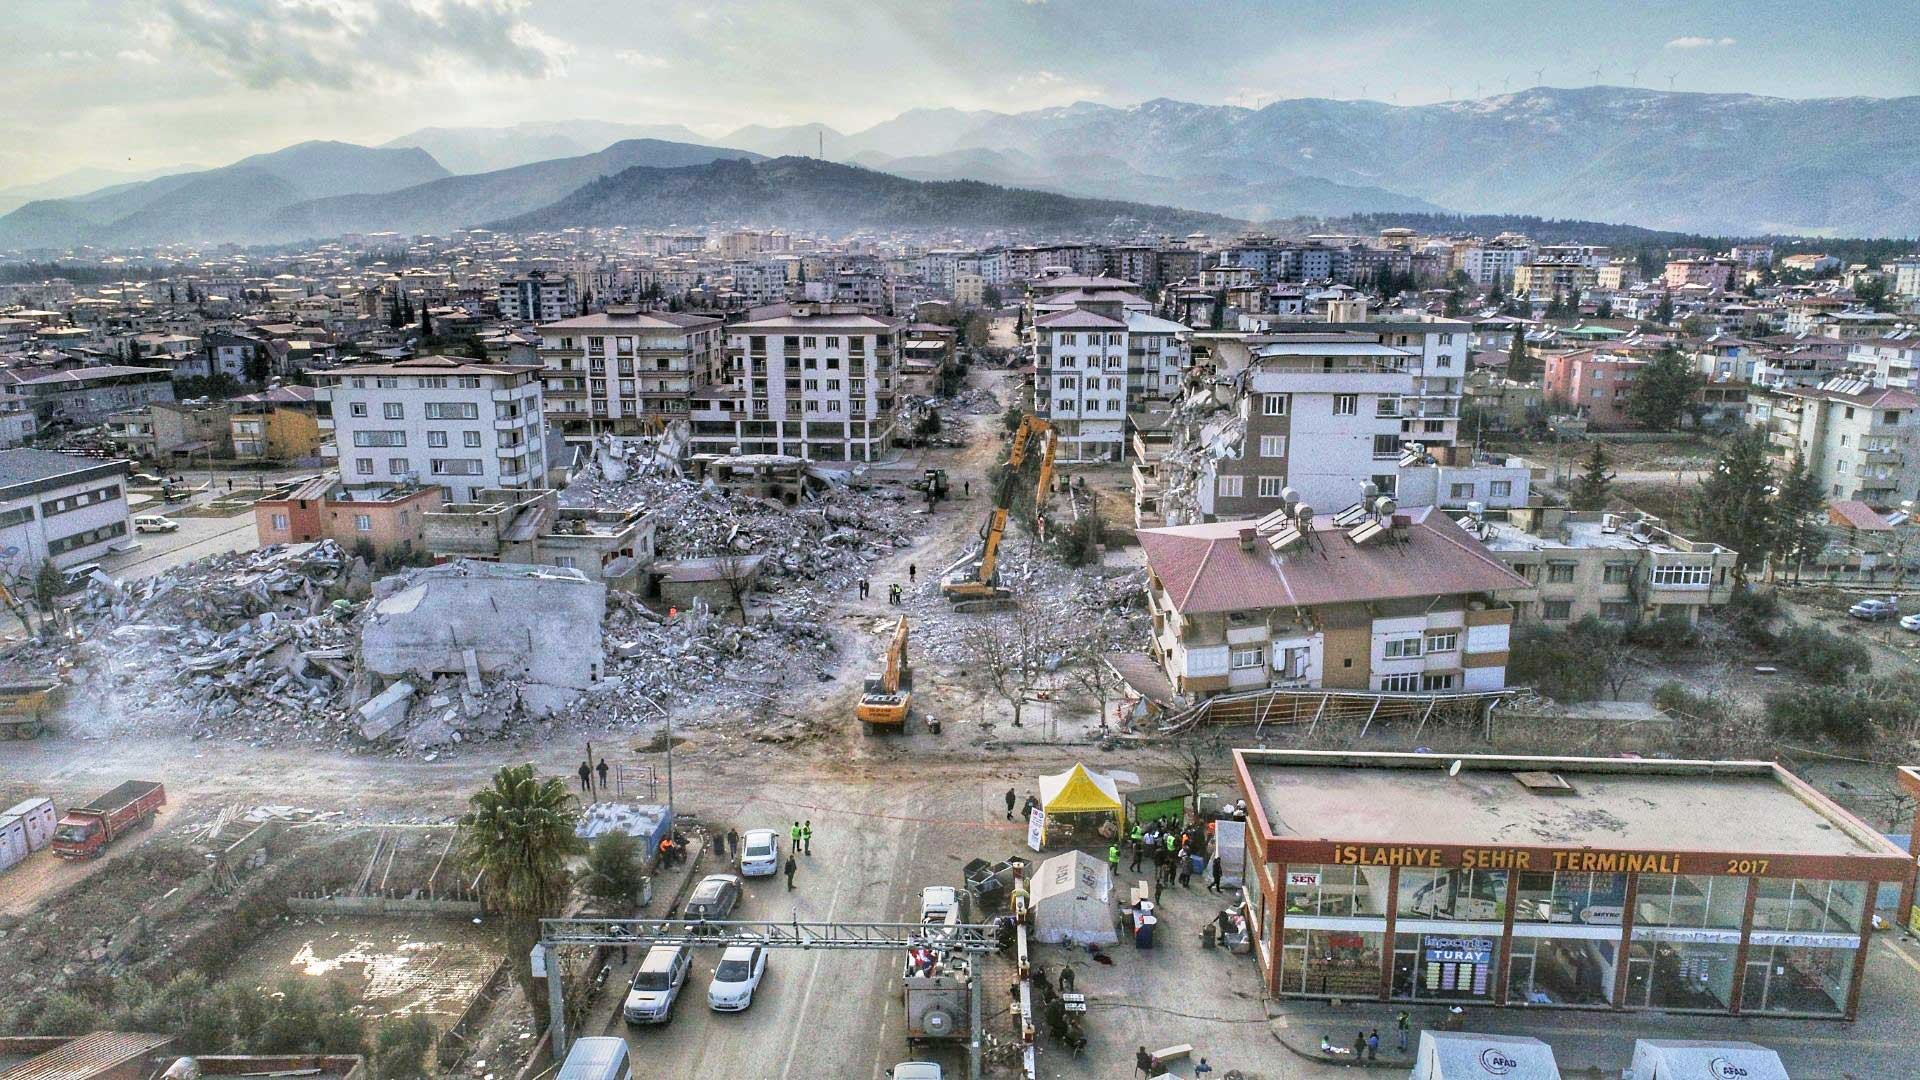 Aerial View after earthquakes in Turkey